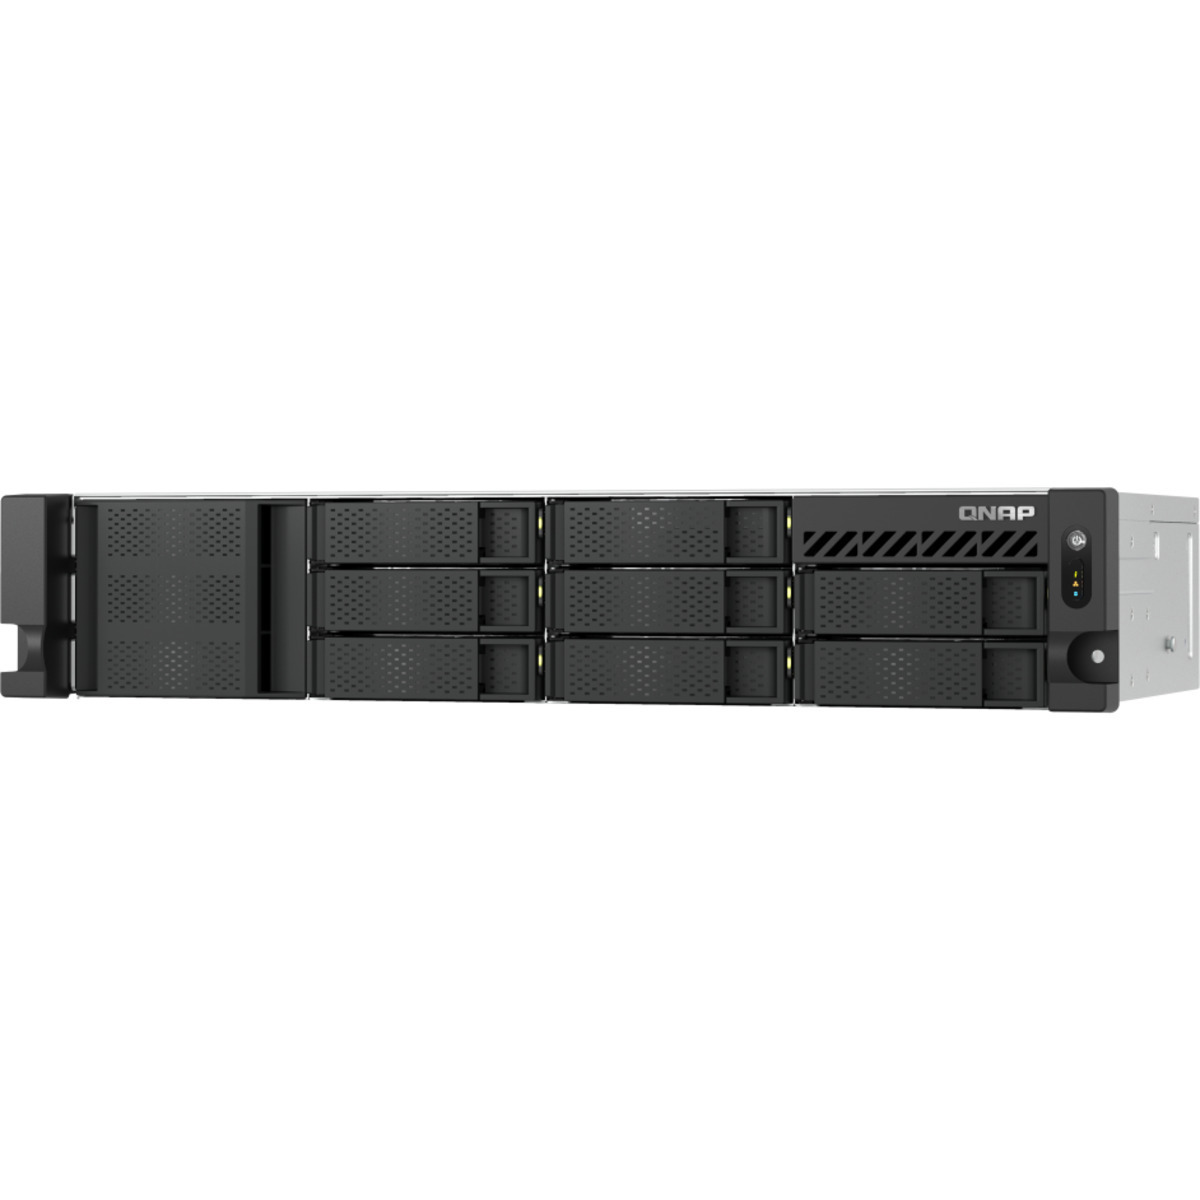 QNAP TS-855eU 60tb 8-Bay RackMount Multimedia / Power User / Business NAS - Network Attached Storage Device 6x10tb Seagate IronWolf Pro ST10000NT001 3.5 7200rpm SATA 6Gb/s HDD NAS Class Drives Installed - Burn-In Tested - ON SALE - FREE RAM UPGRADE TS-855eU